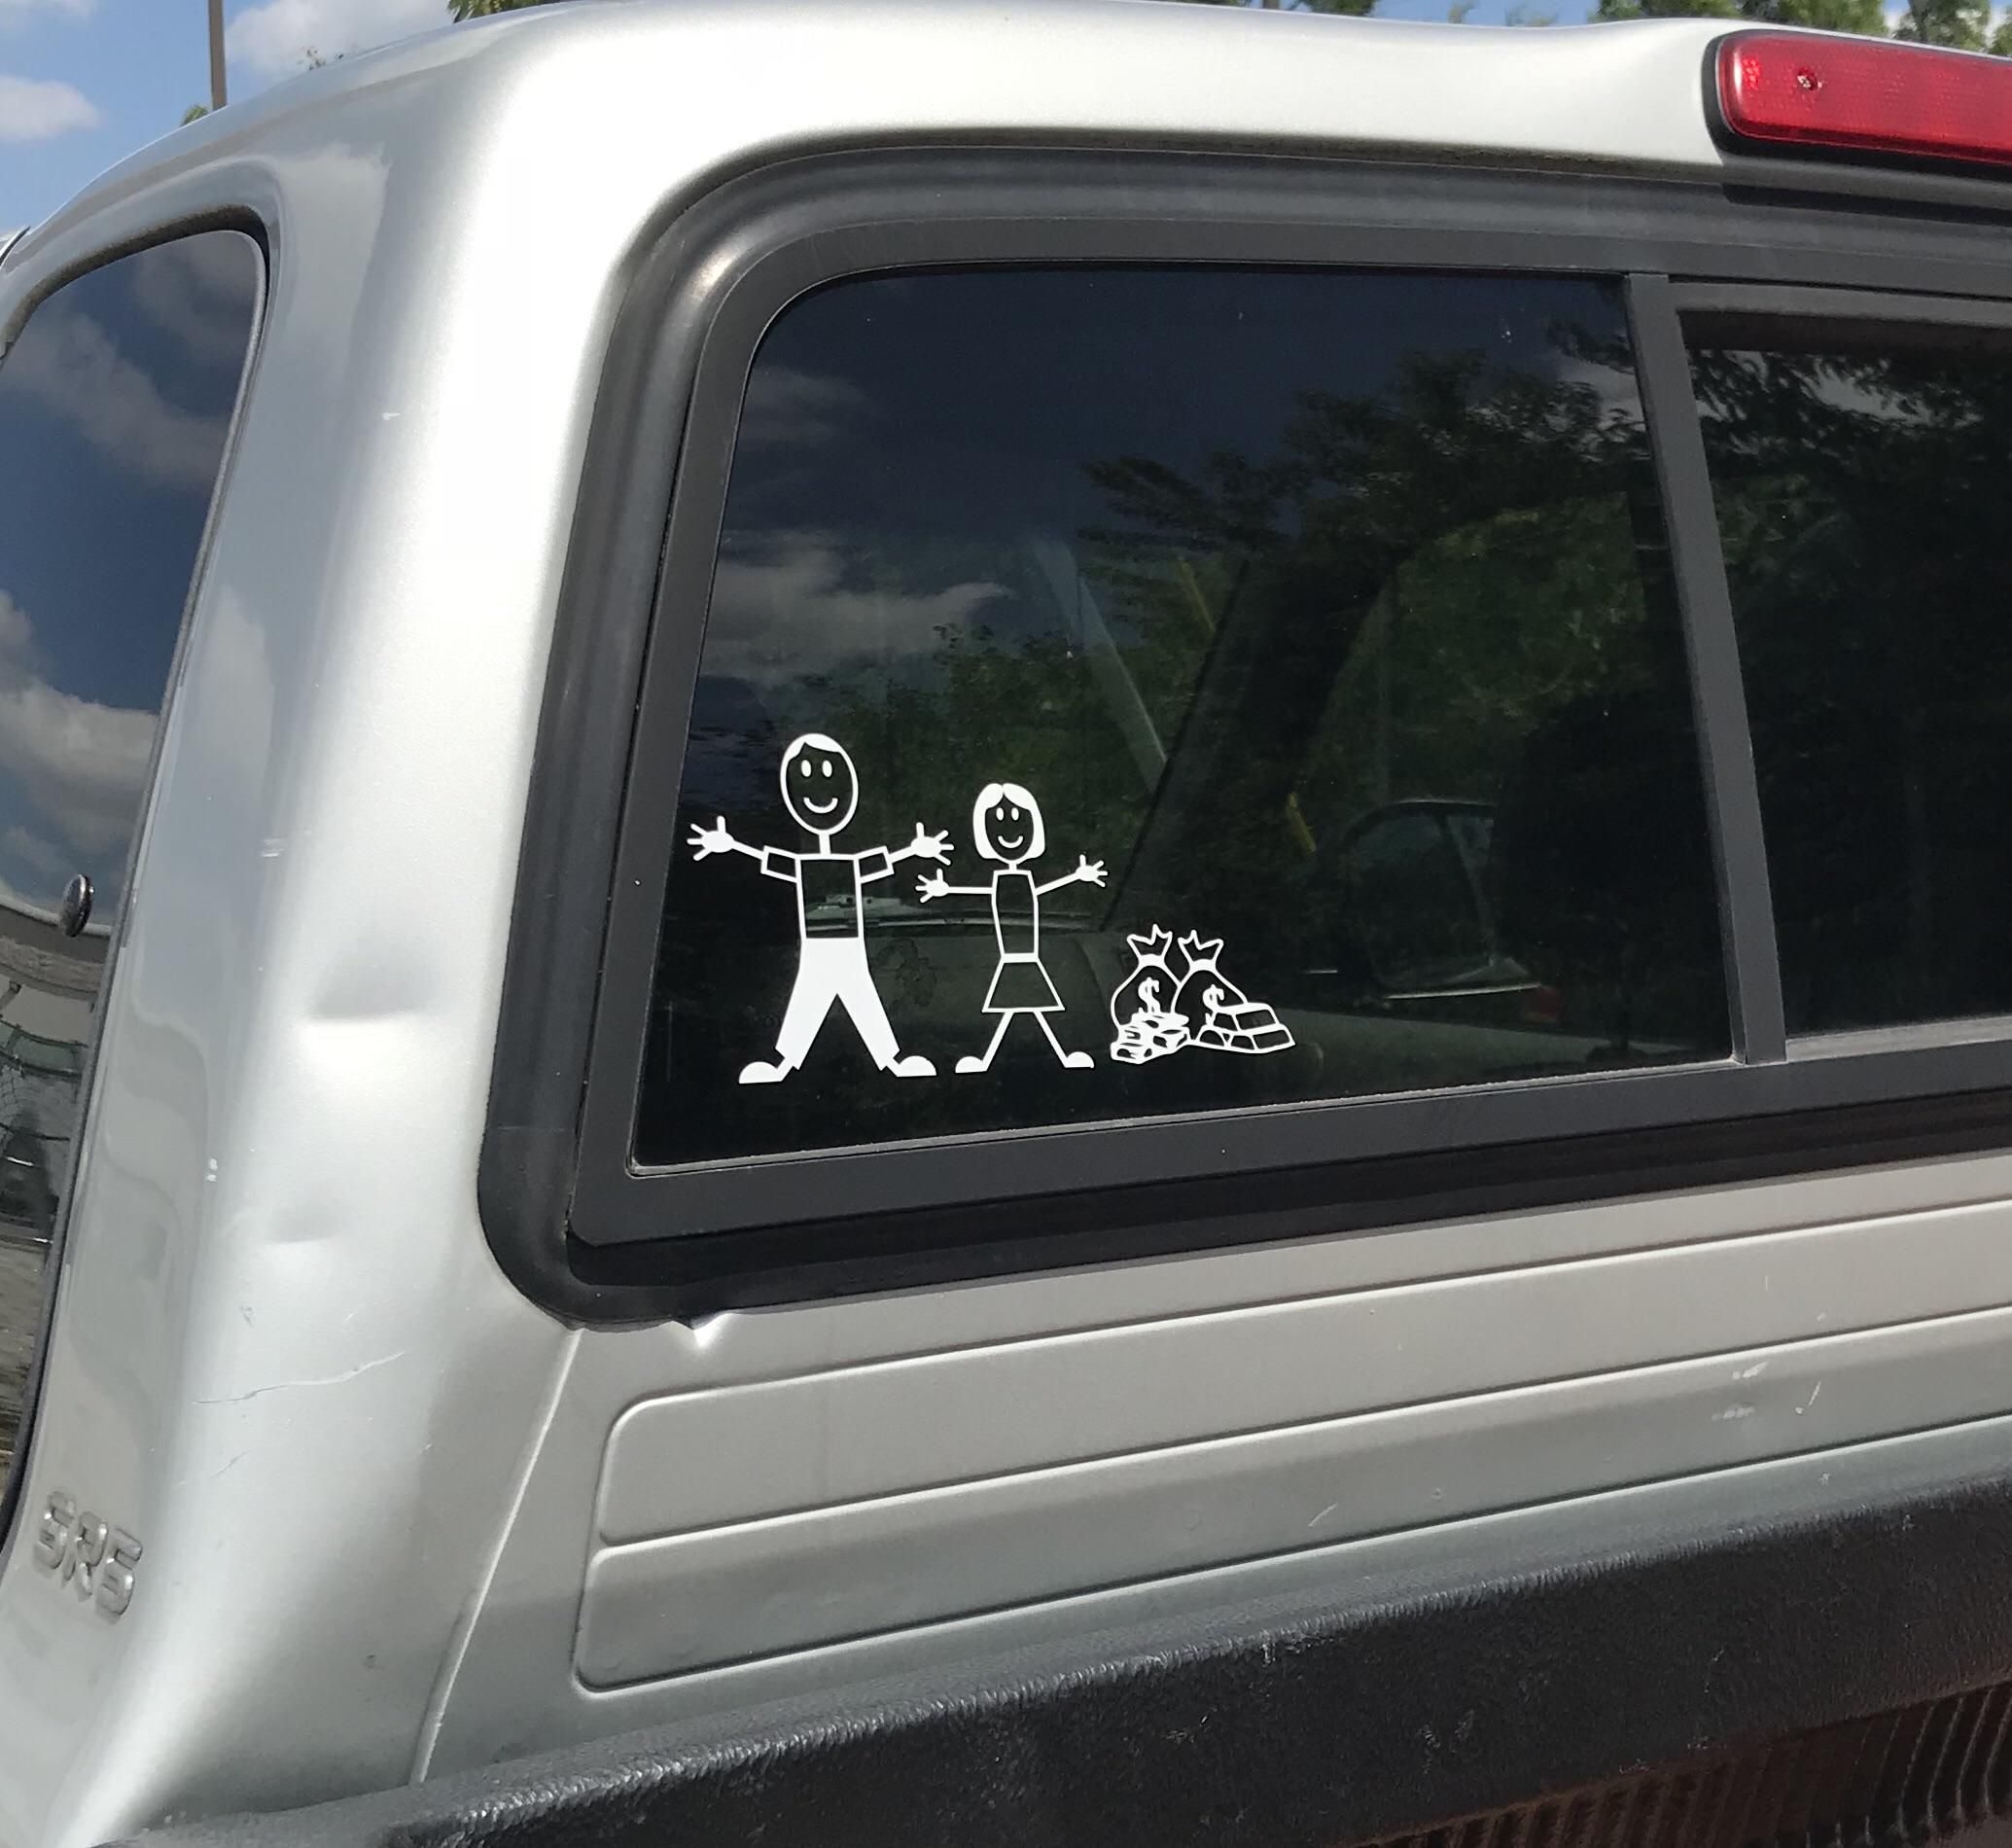 Most amusing family stickers I’ve seen!